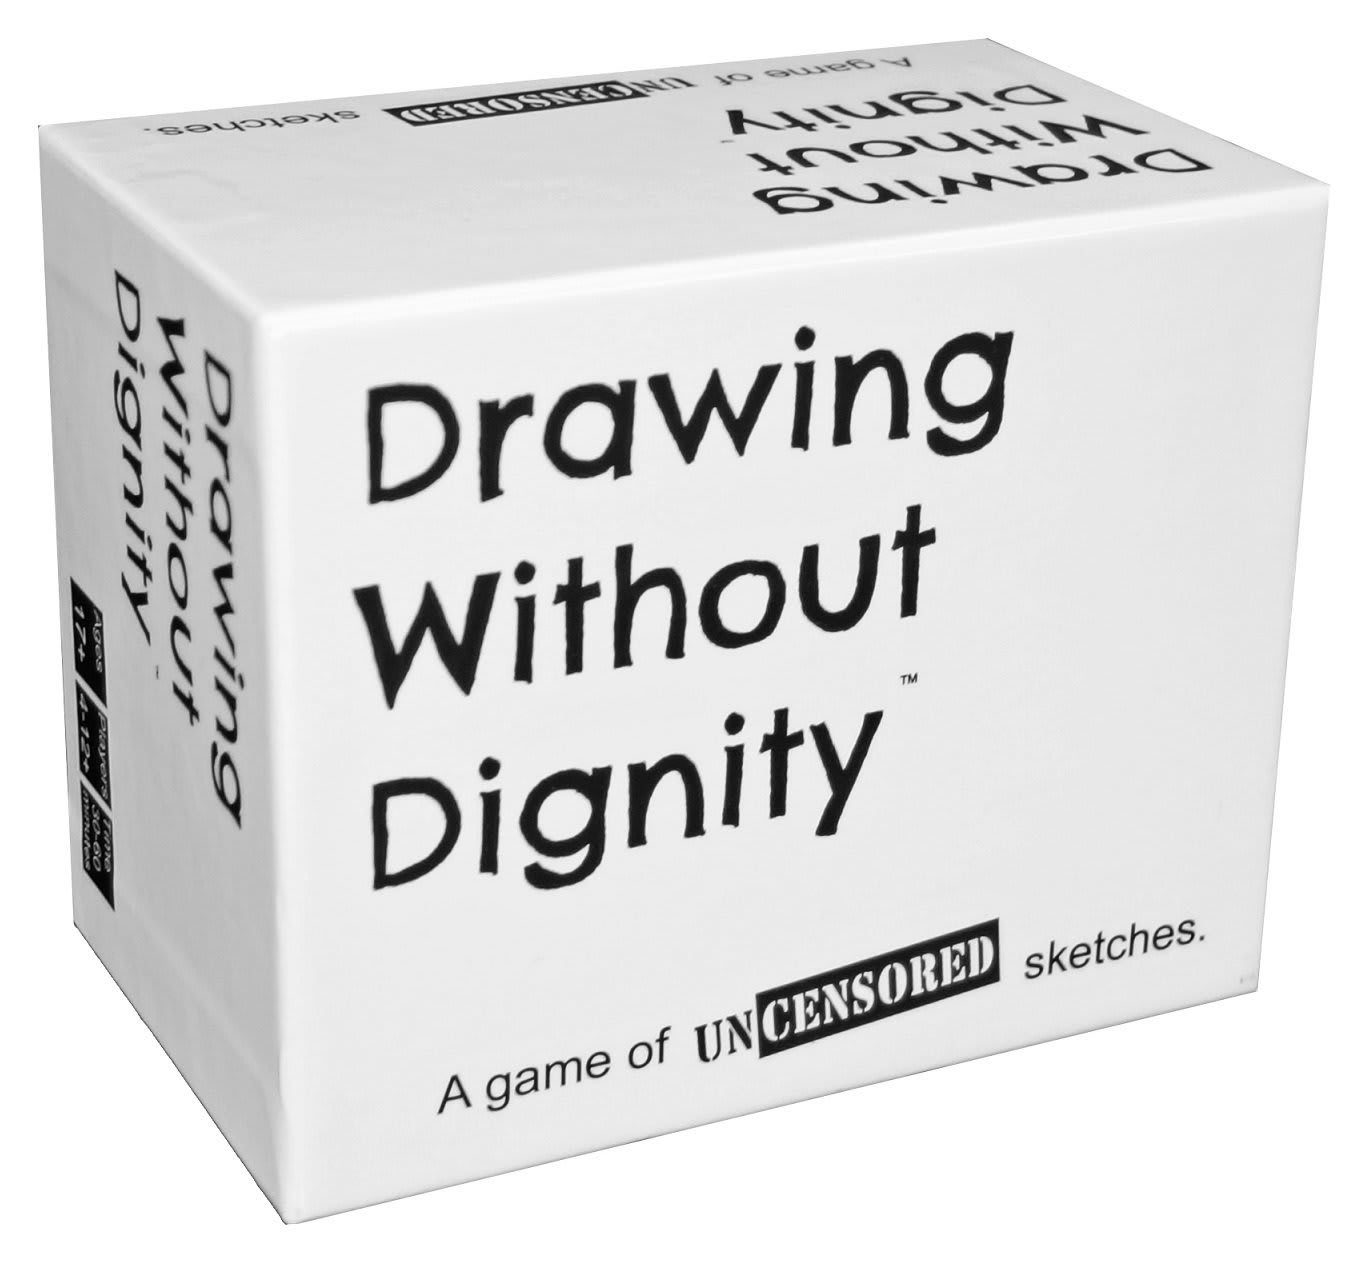 Cards Against HumanityAdult Party GameBest Selling Party GameUK Edition 